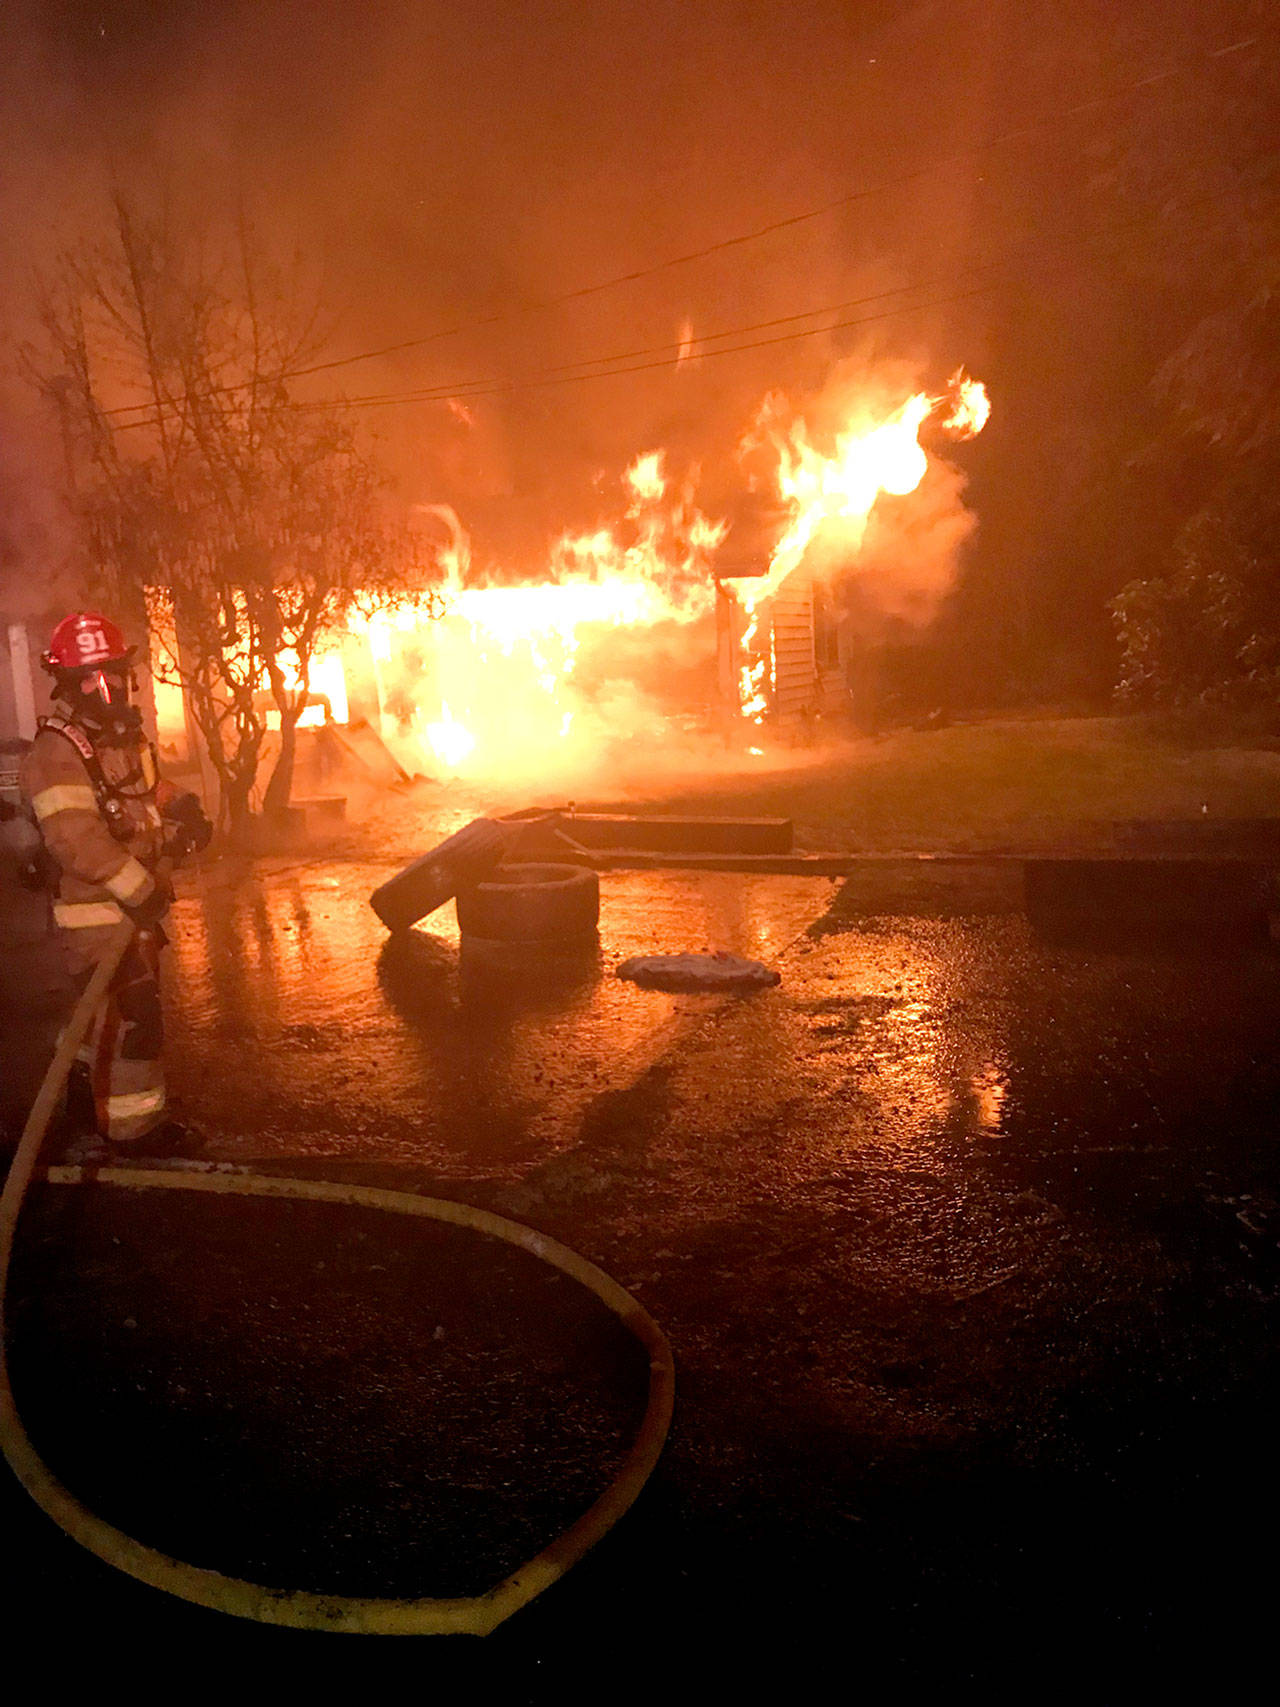 Firefighters battle a blaze at a home outside of Forks early Friday morning. (District 1 Chief Bill Paul)